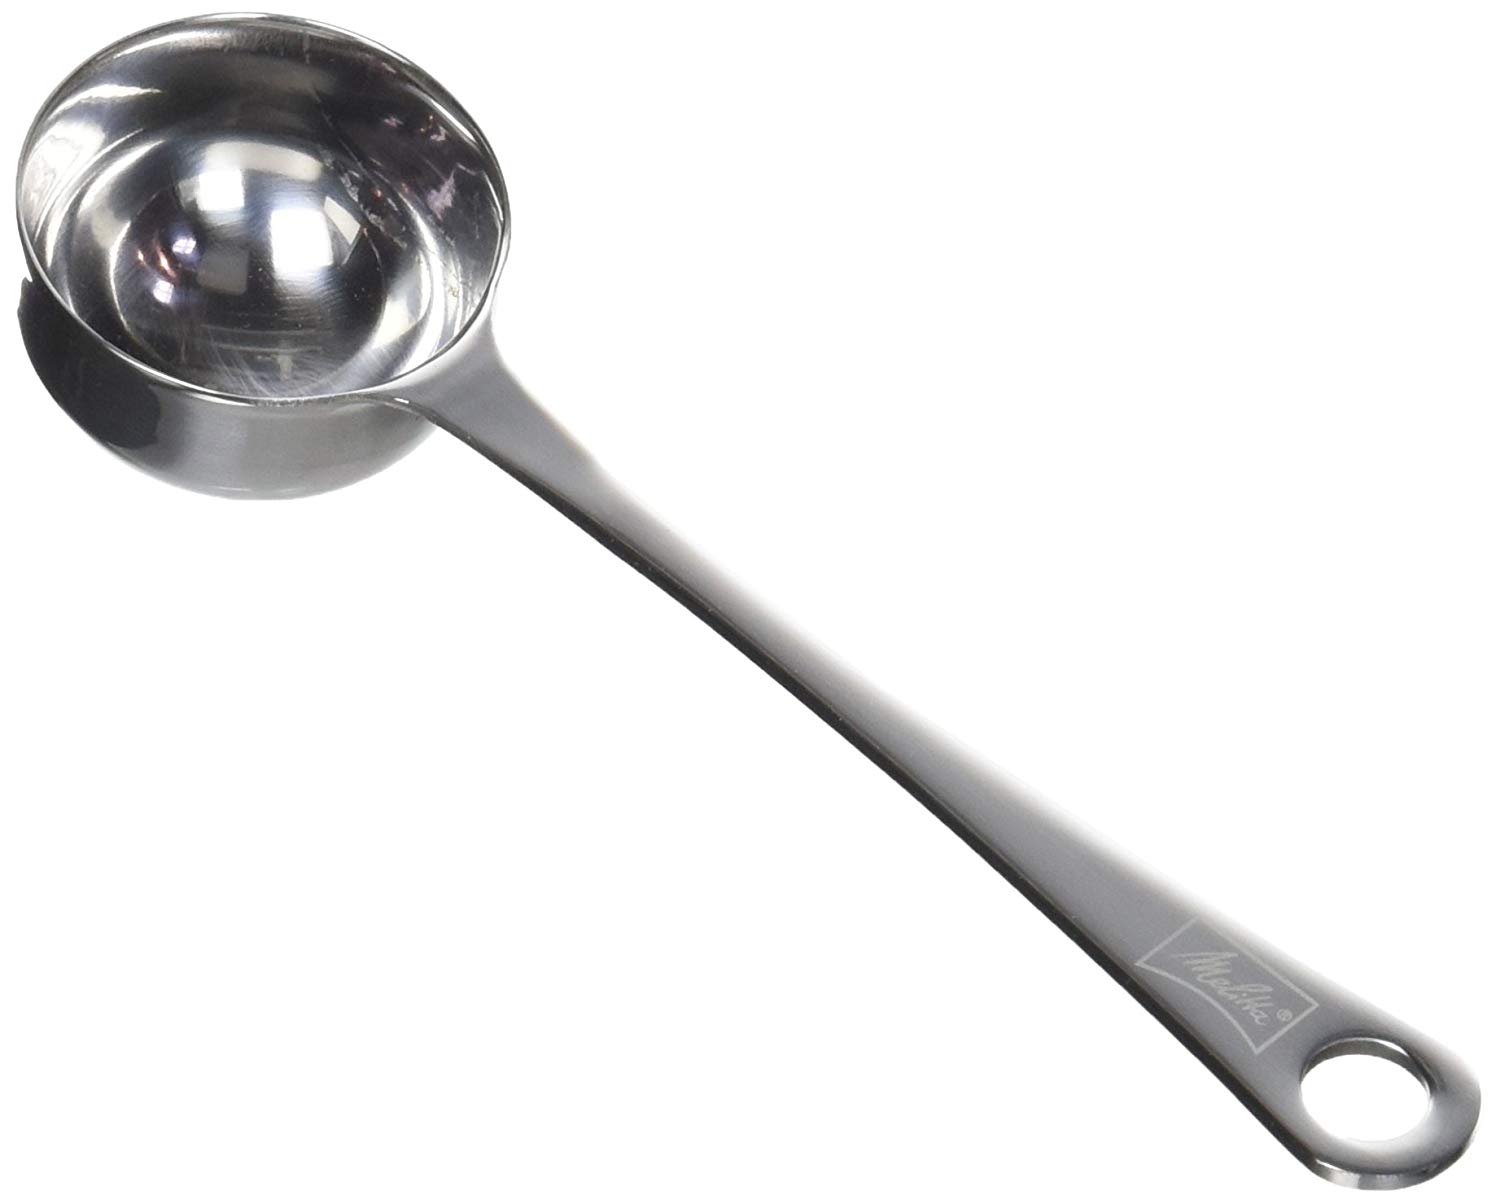 Melitta 170432 Measuring Spoon For Coffee, Stainless Steel